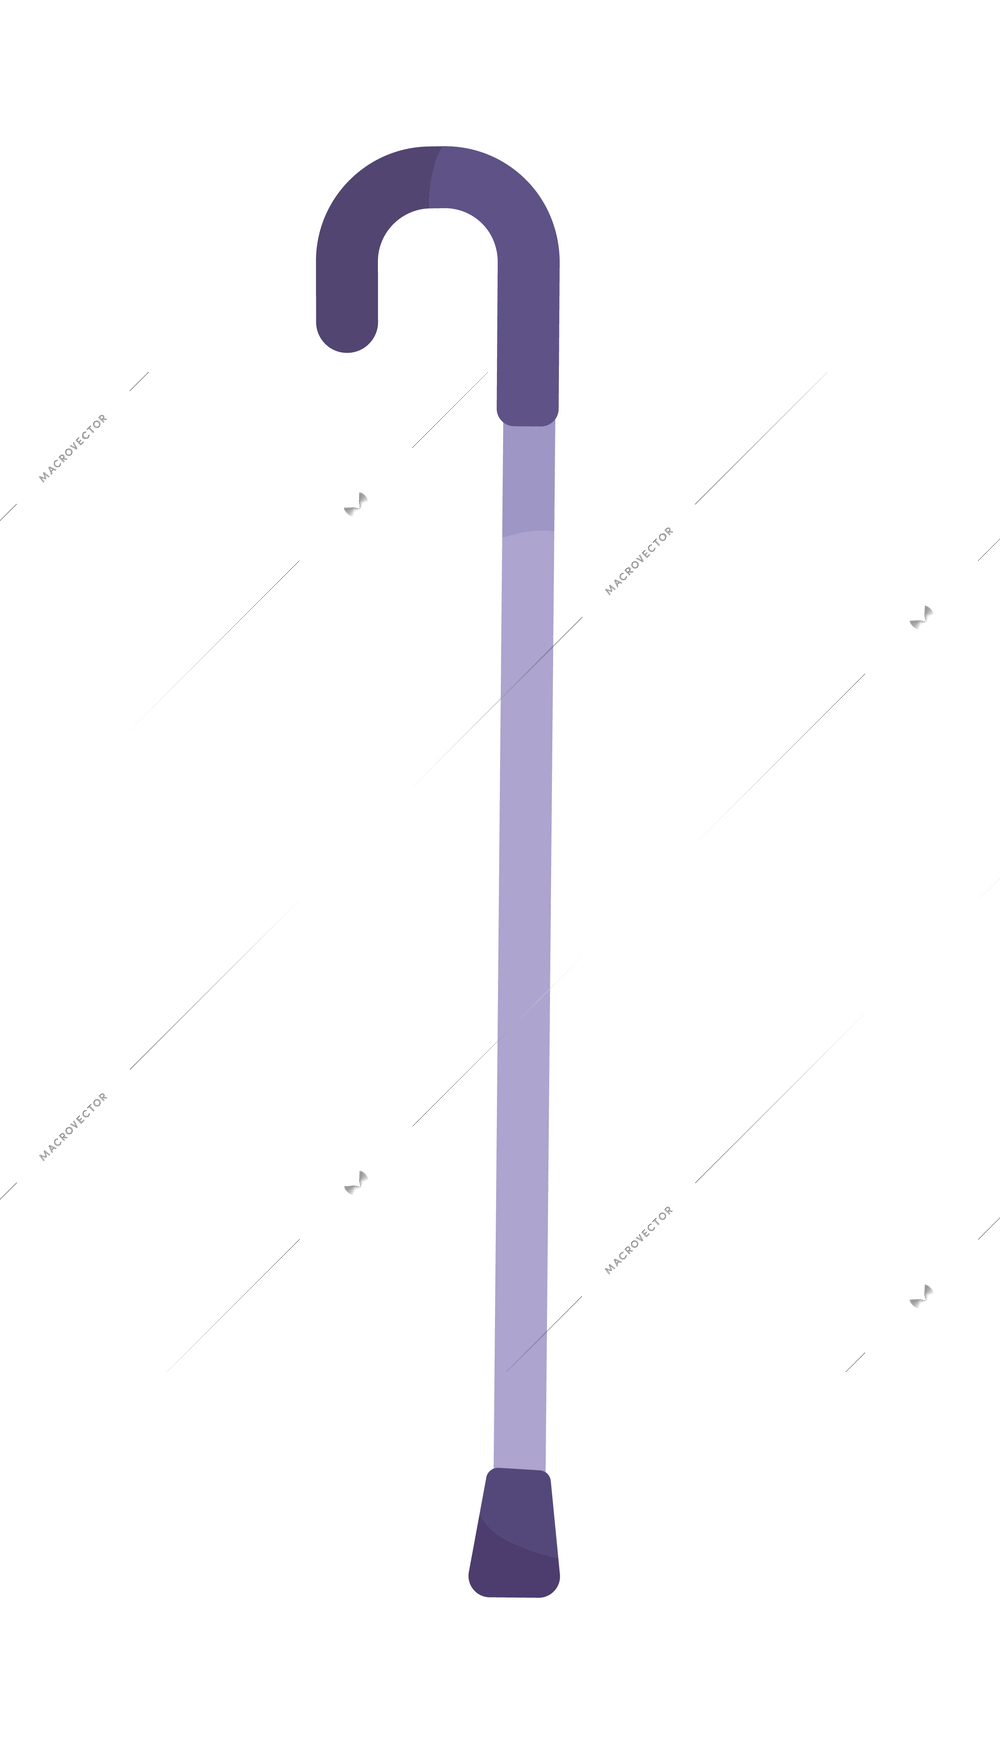 Fracture flat composition with isolated image of walking stick for injured and elderly people vector illustration